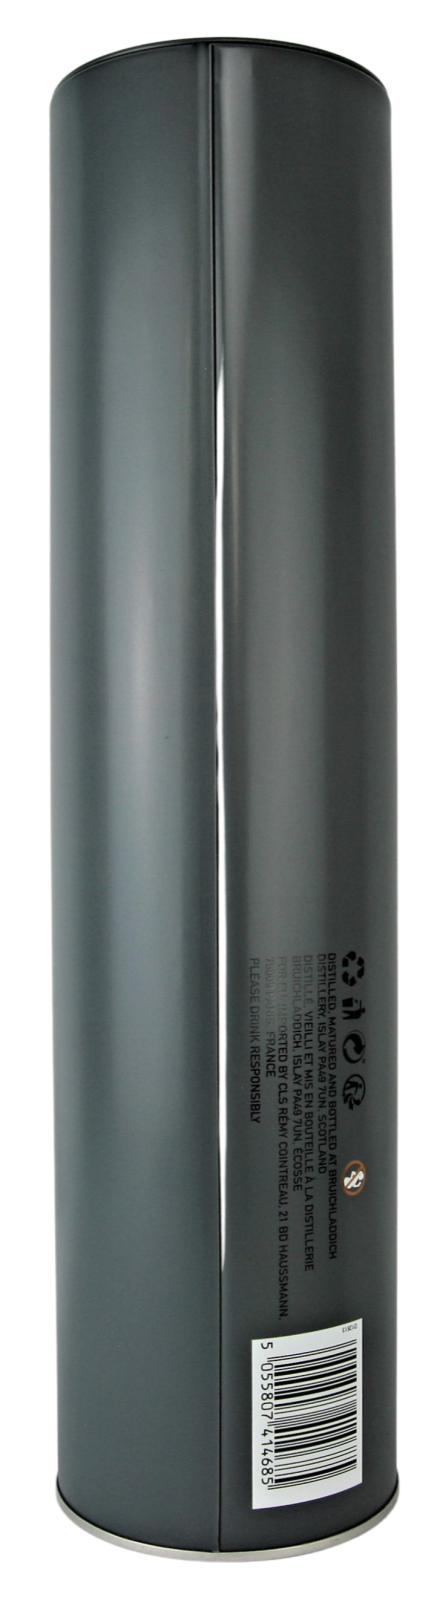 Octomore Edition 12.1 / 130.8 PPM